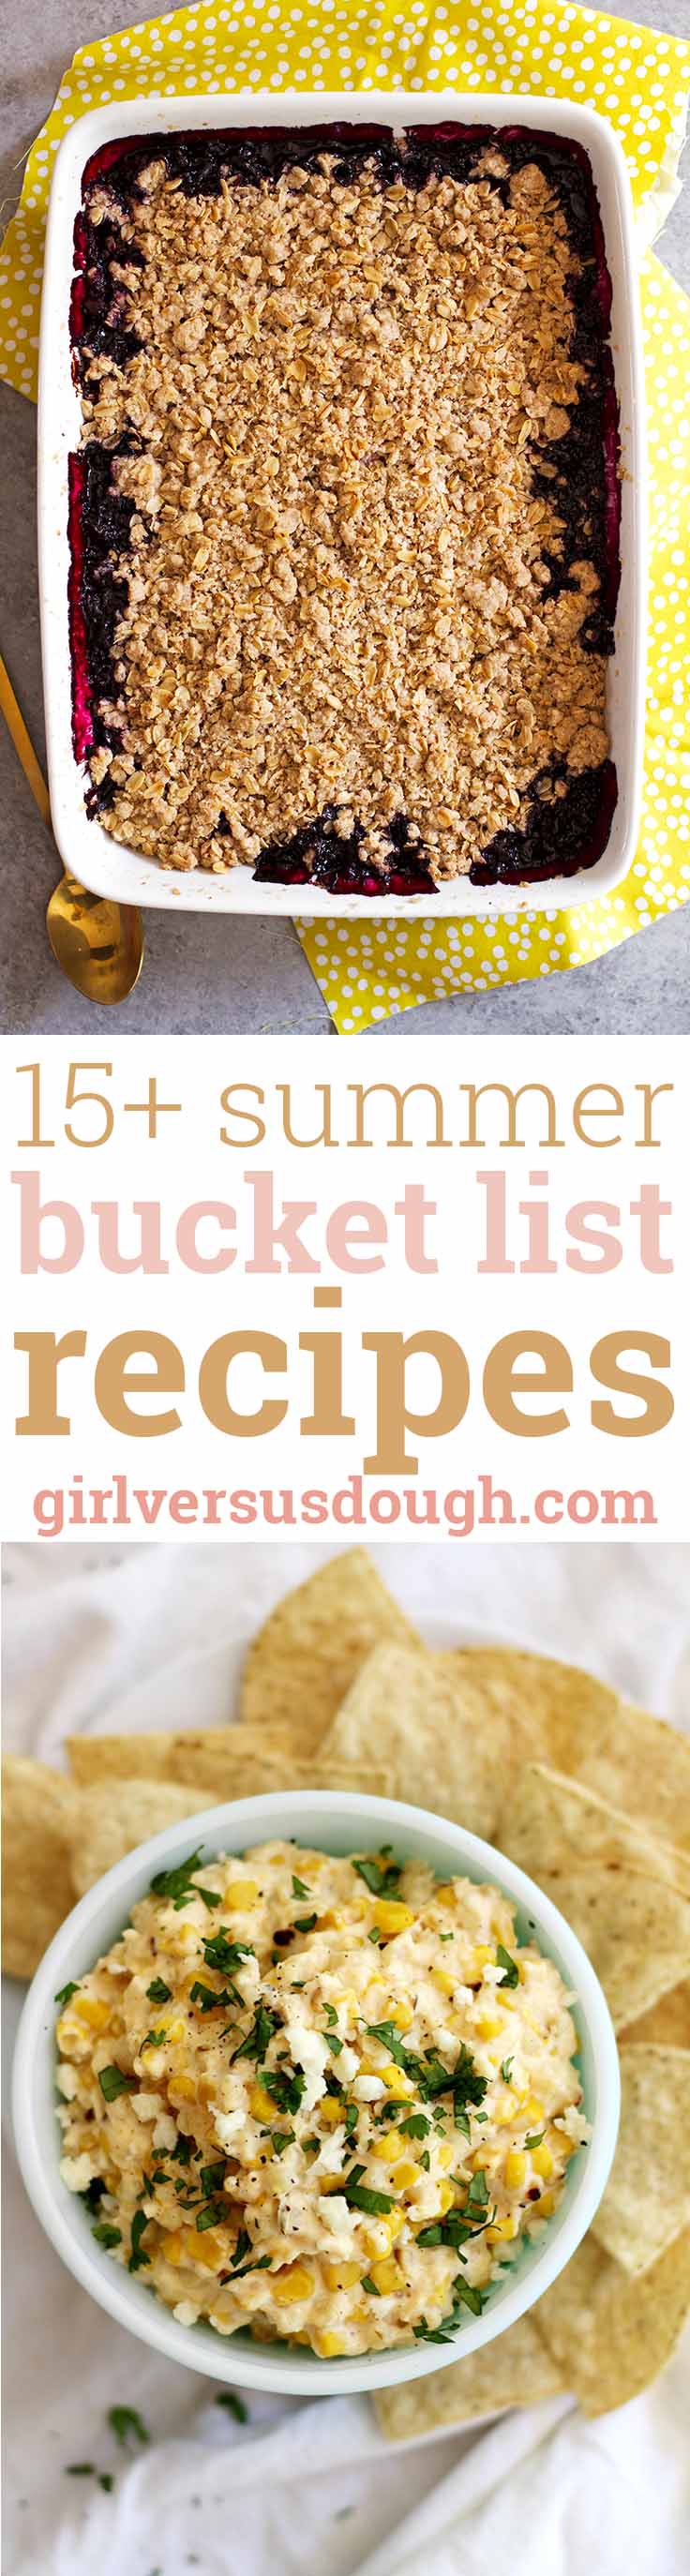 15+ Summer Bucket List Recipes -- These are THE recipes to make before summer ends. www.girlversusdough.com @girlversusdough